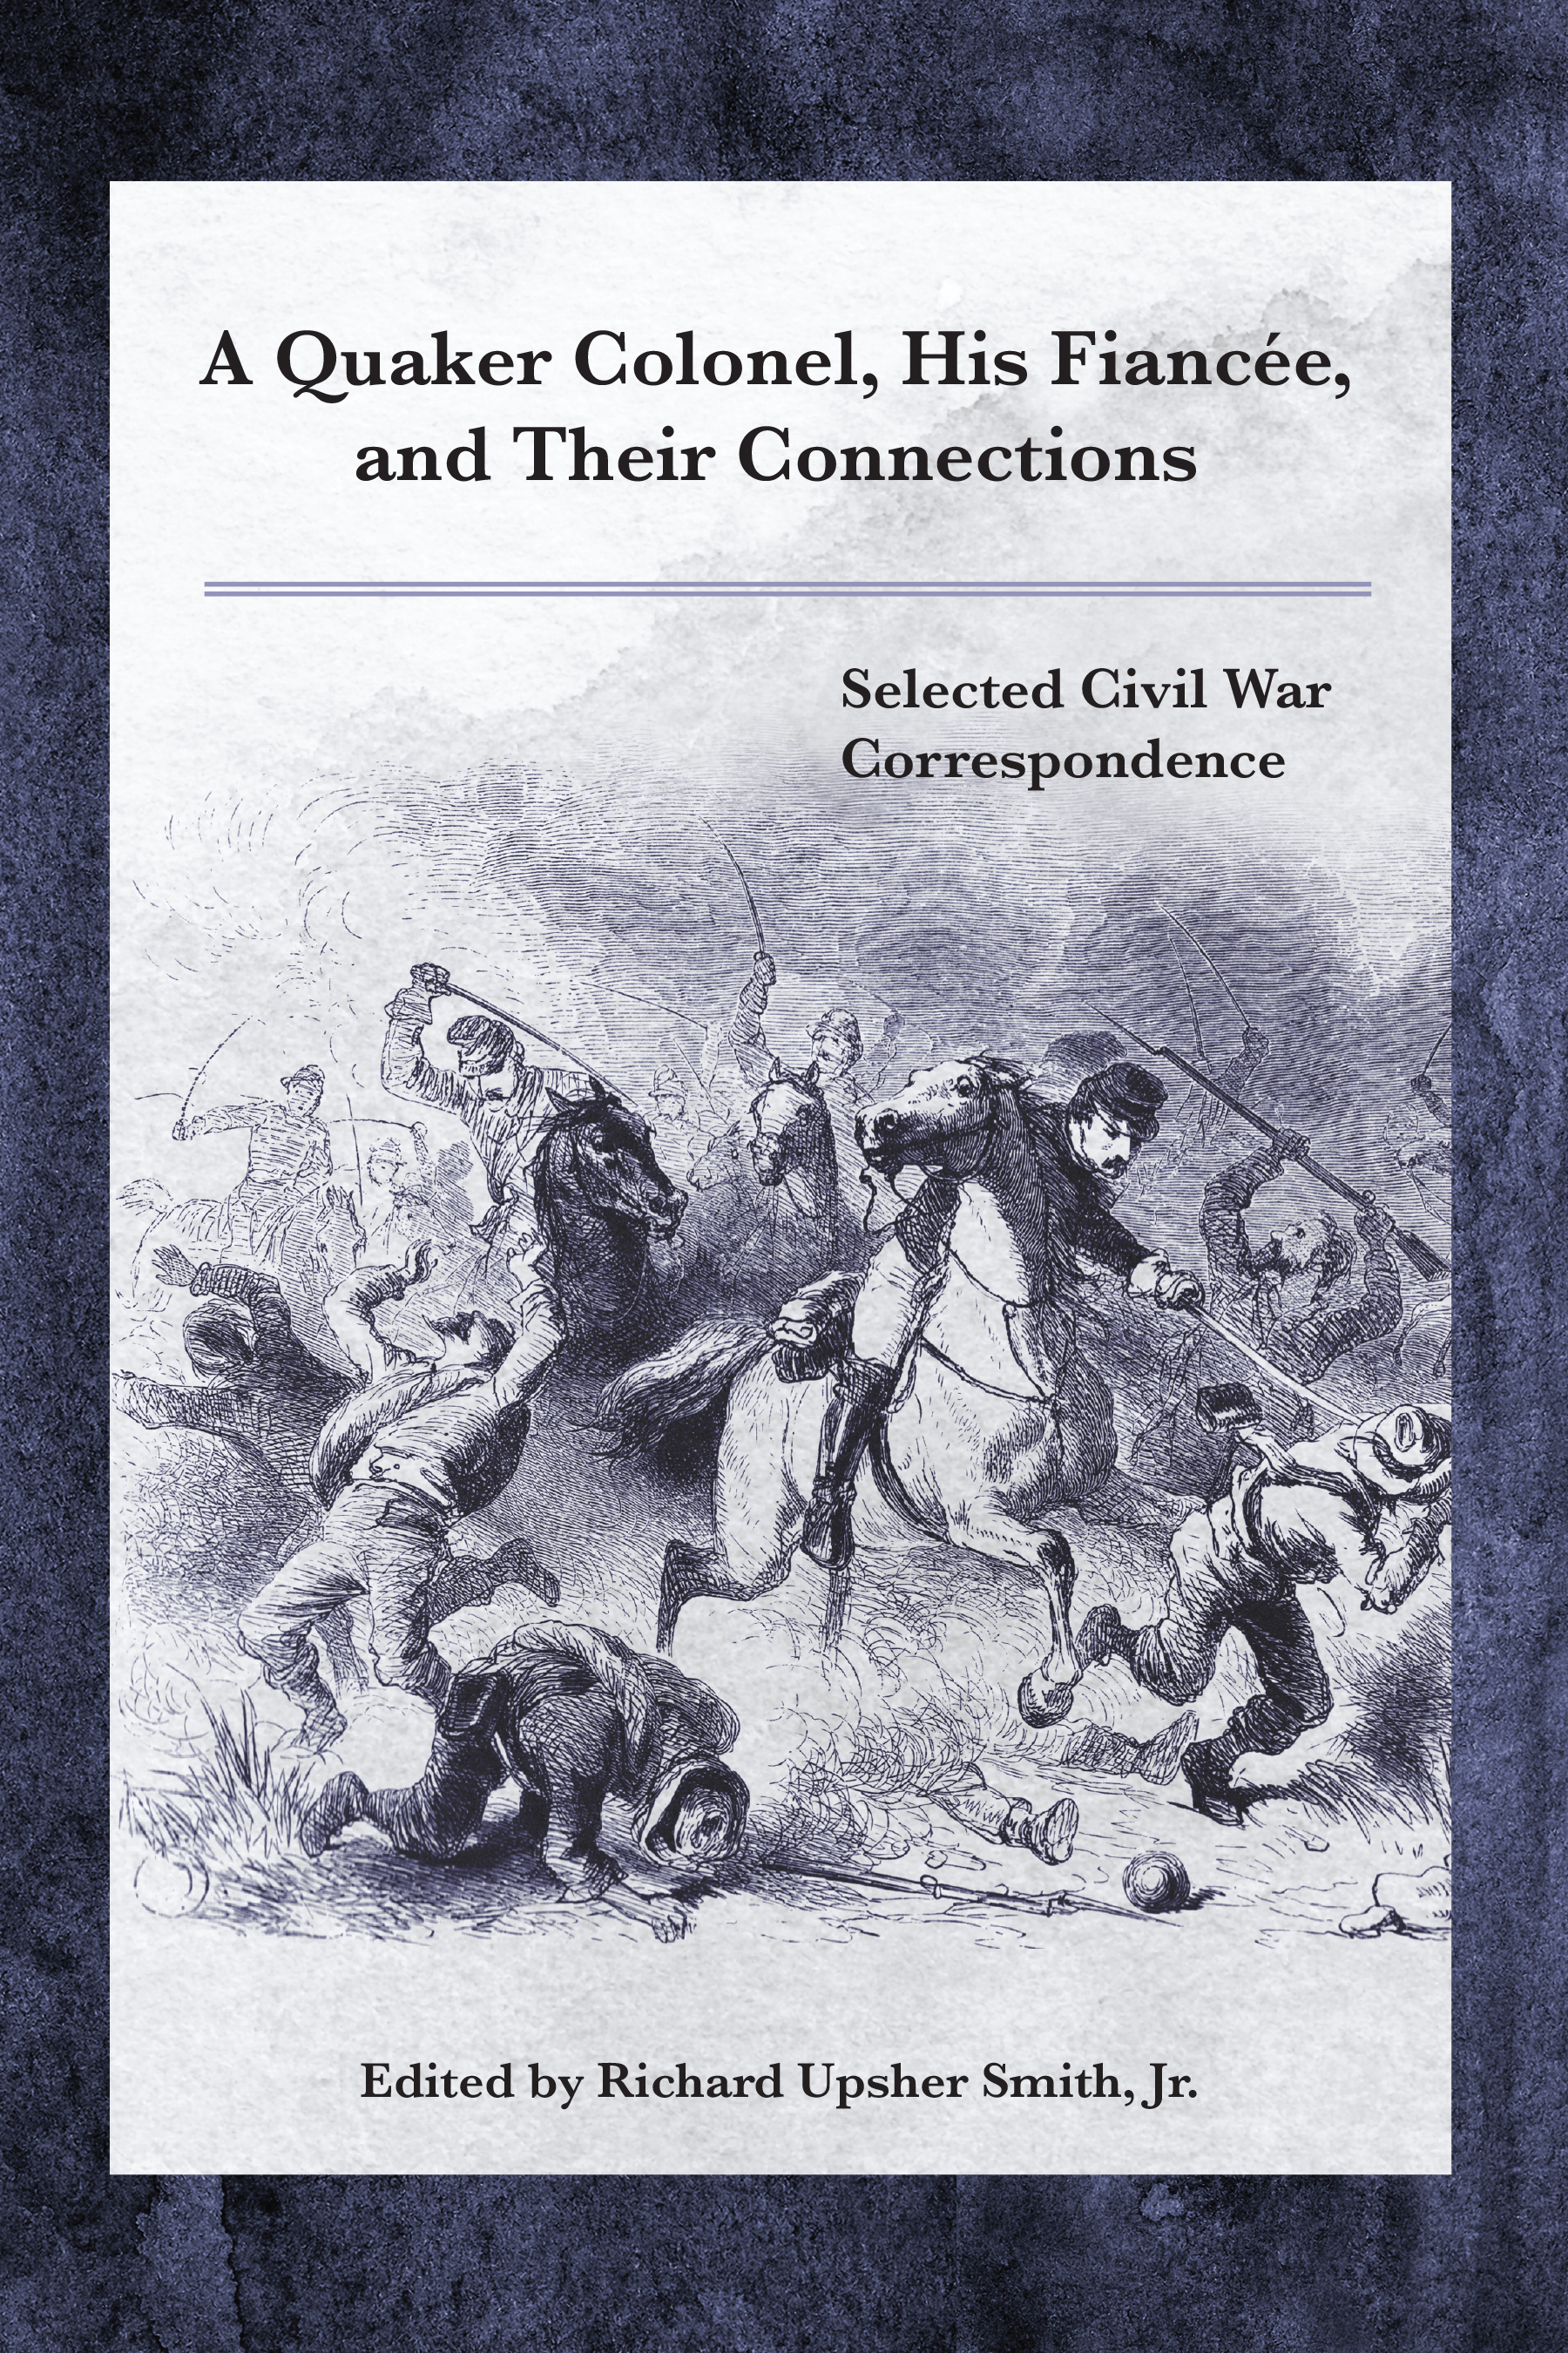 A Quaker Colonel, His Fiancée, and Their Connections: Selected Civil War Correspondence